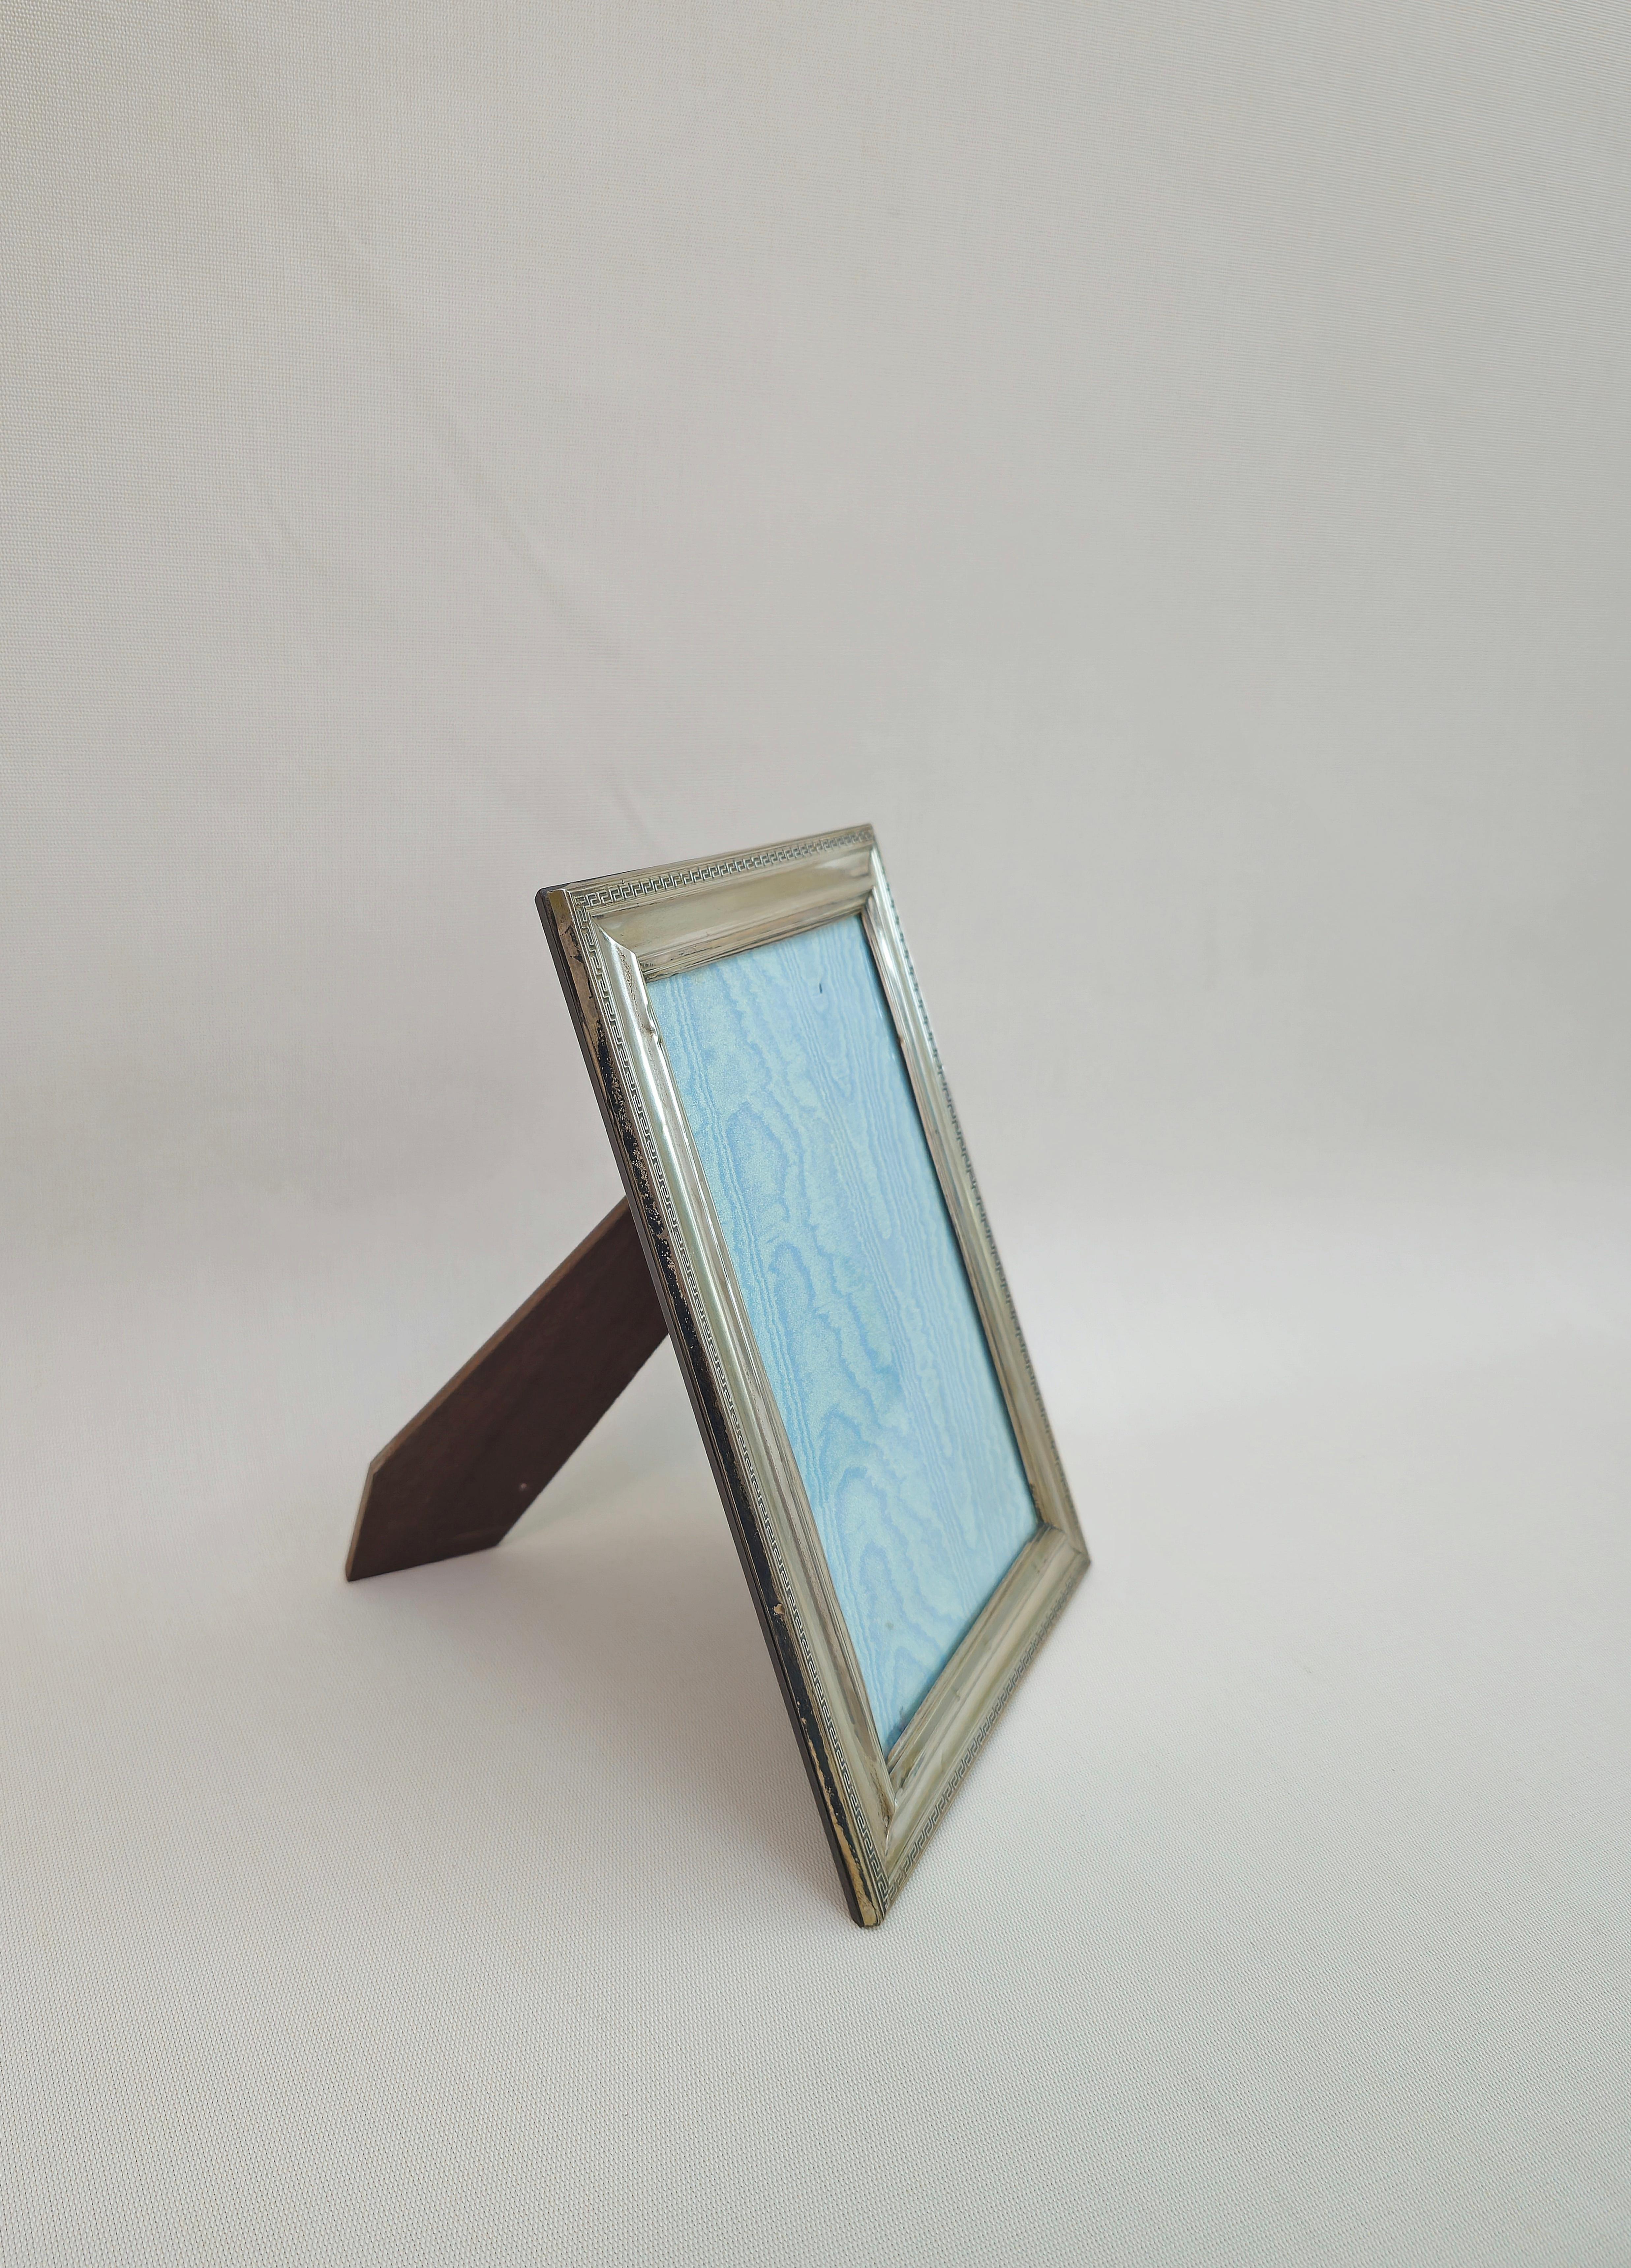 Decorative Object Picture Frame Silver 800 Wood Midcentury Italian Design 1950s In Good Condition For Sale In Palermo, IT